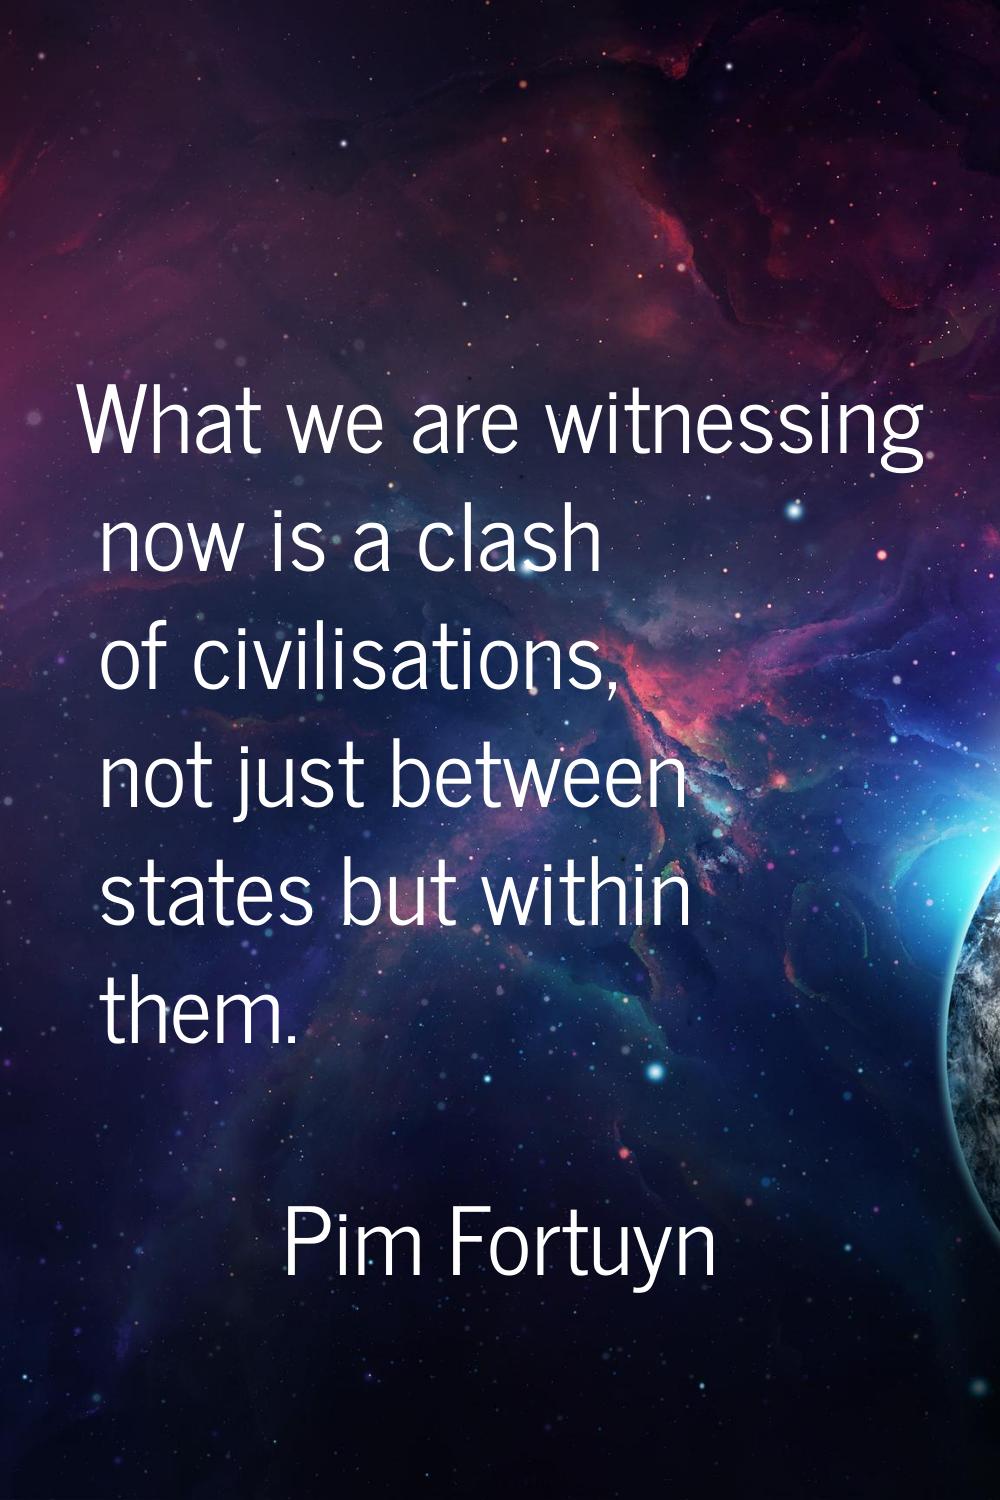 What we are witnessing now is a clash of civilisations, not just between states but within them.